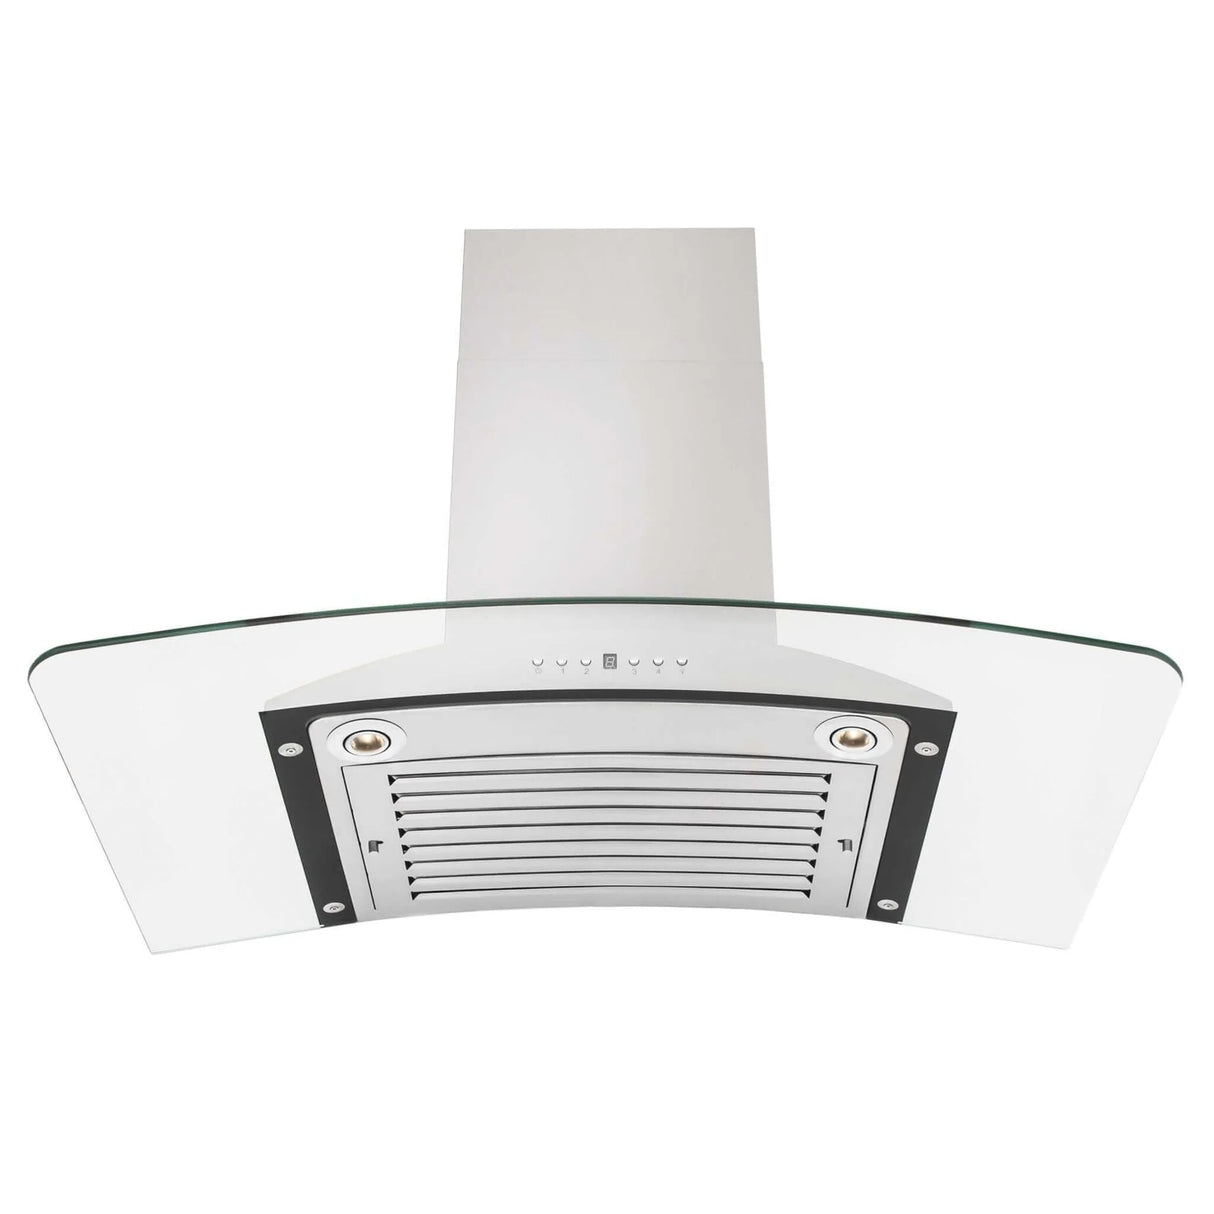 ZLINE 30" Convertible Vent Convertible Vent Wall Mount Range Hood in Stainless Steel & Glass